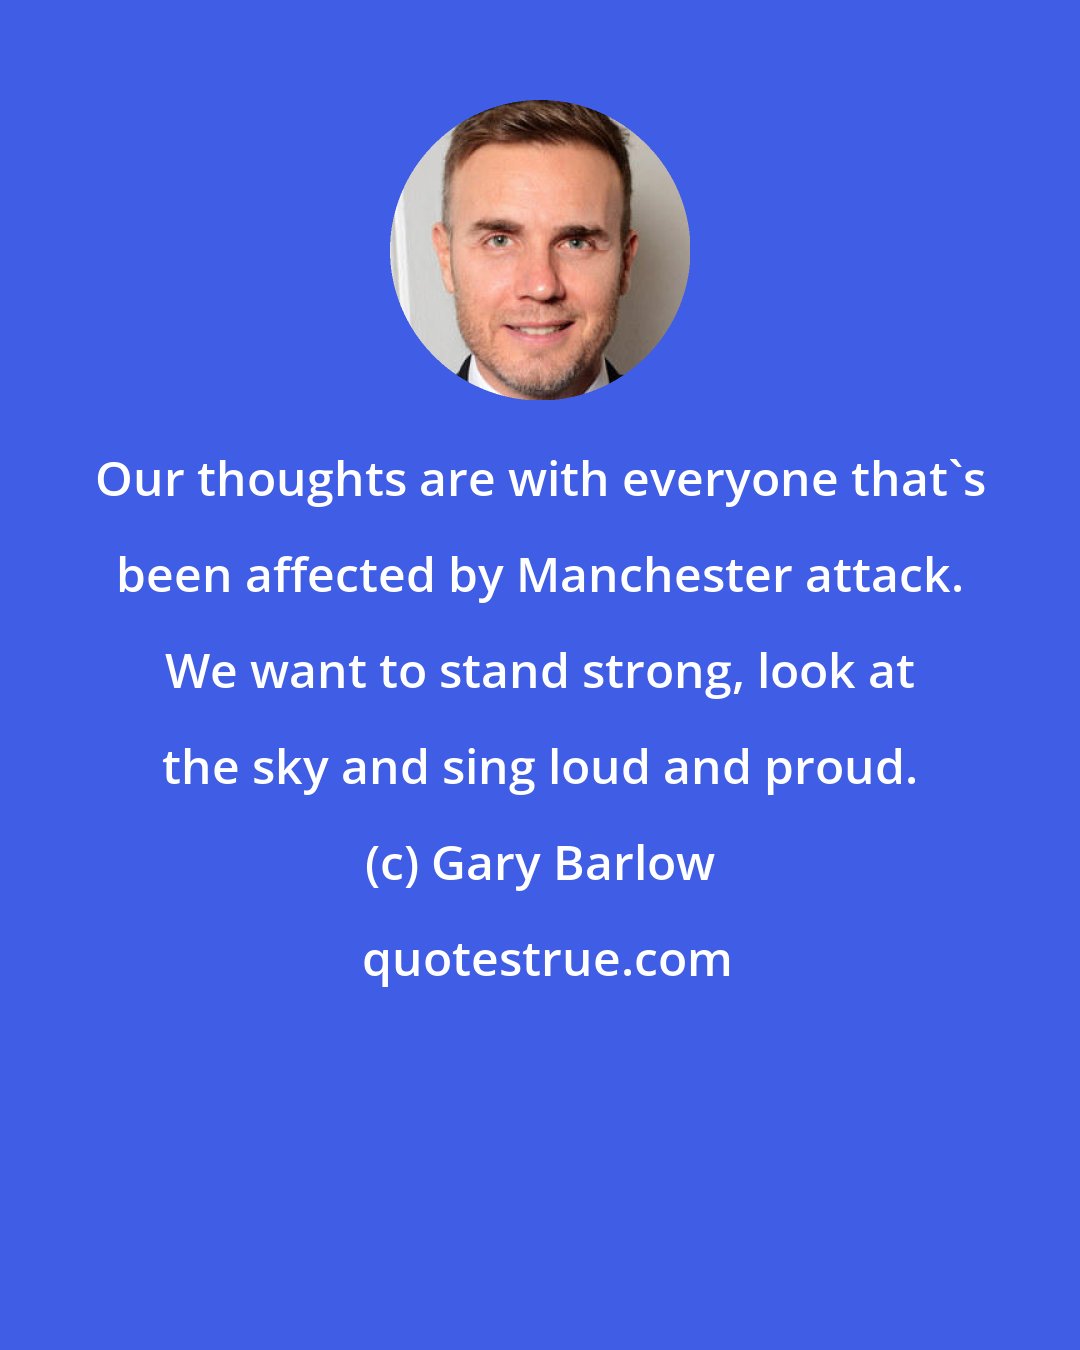 Gary Barlow: Our thoughts are with everyone that's been affected by Manchester attack. We want to stand strong, look at the sky and sing loud and proud.